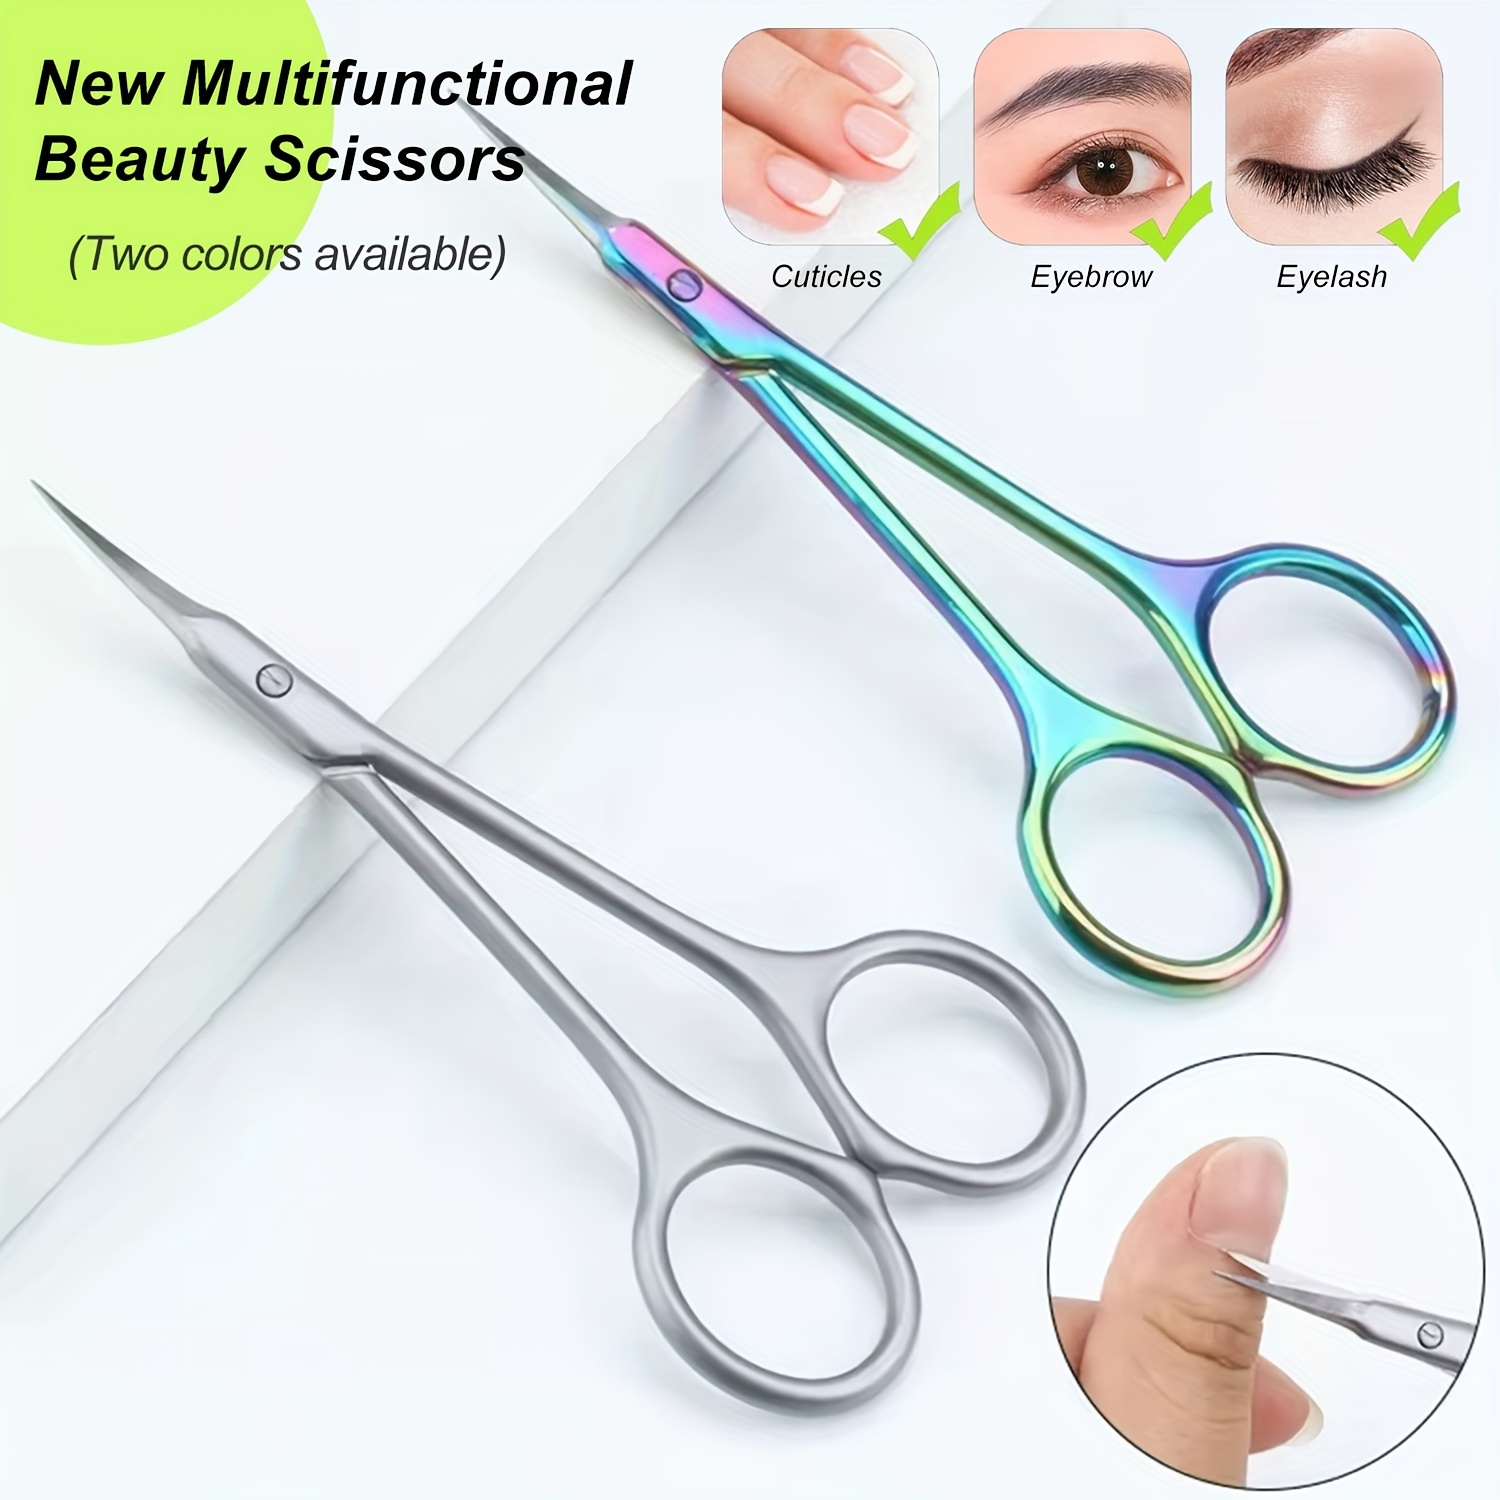 

Professional Stainless Steel Cuticle Scissors - Sharp Precision Dead Skin Remover For Fingernails And Toenails - Right Hand Unscented Multipurpose Beauty Scissors For Nose Hair, Eyelashes, Eyebrows